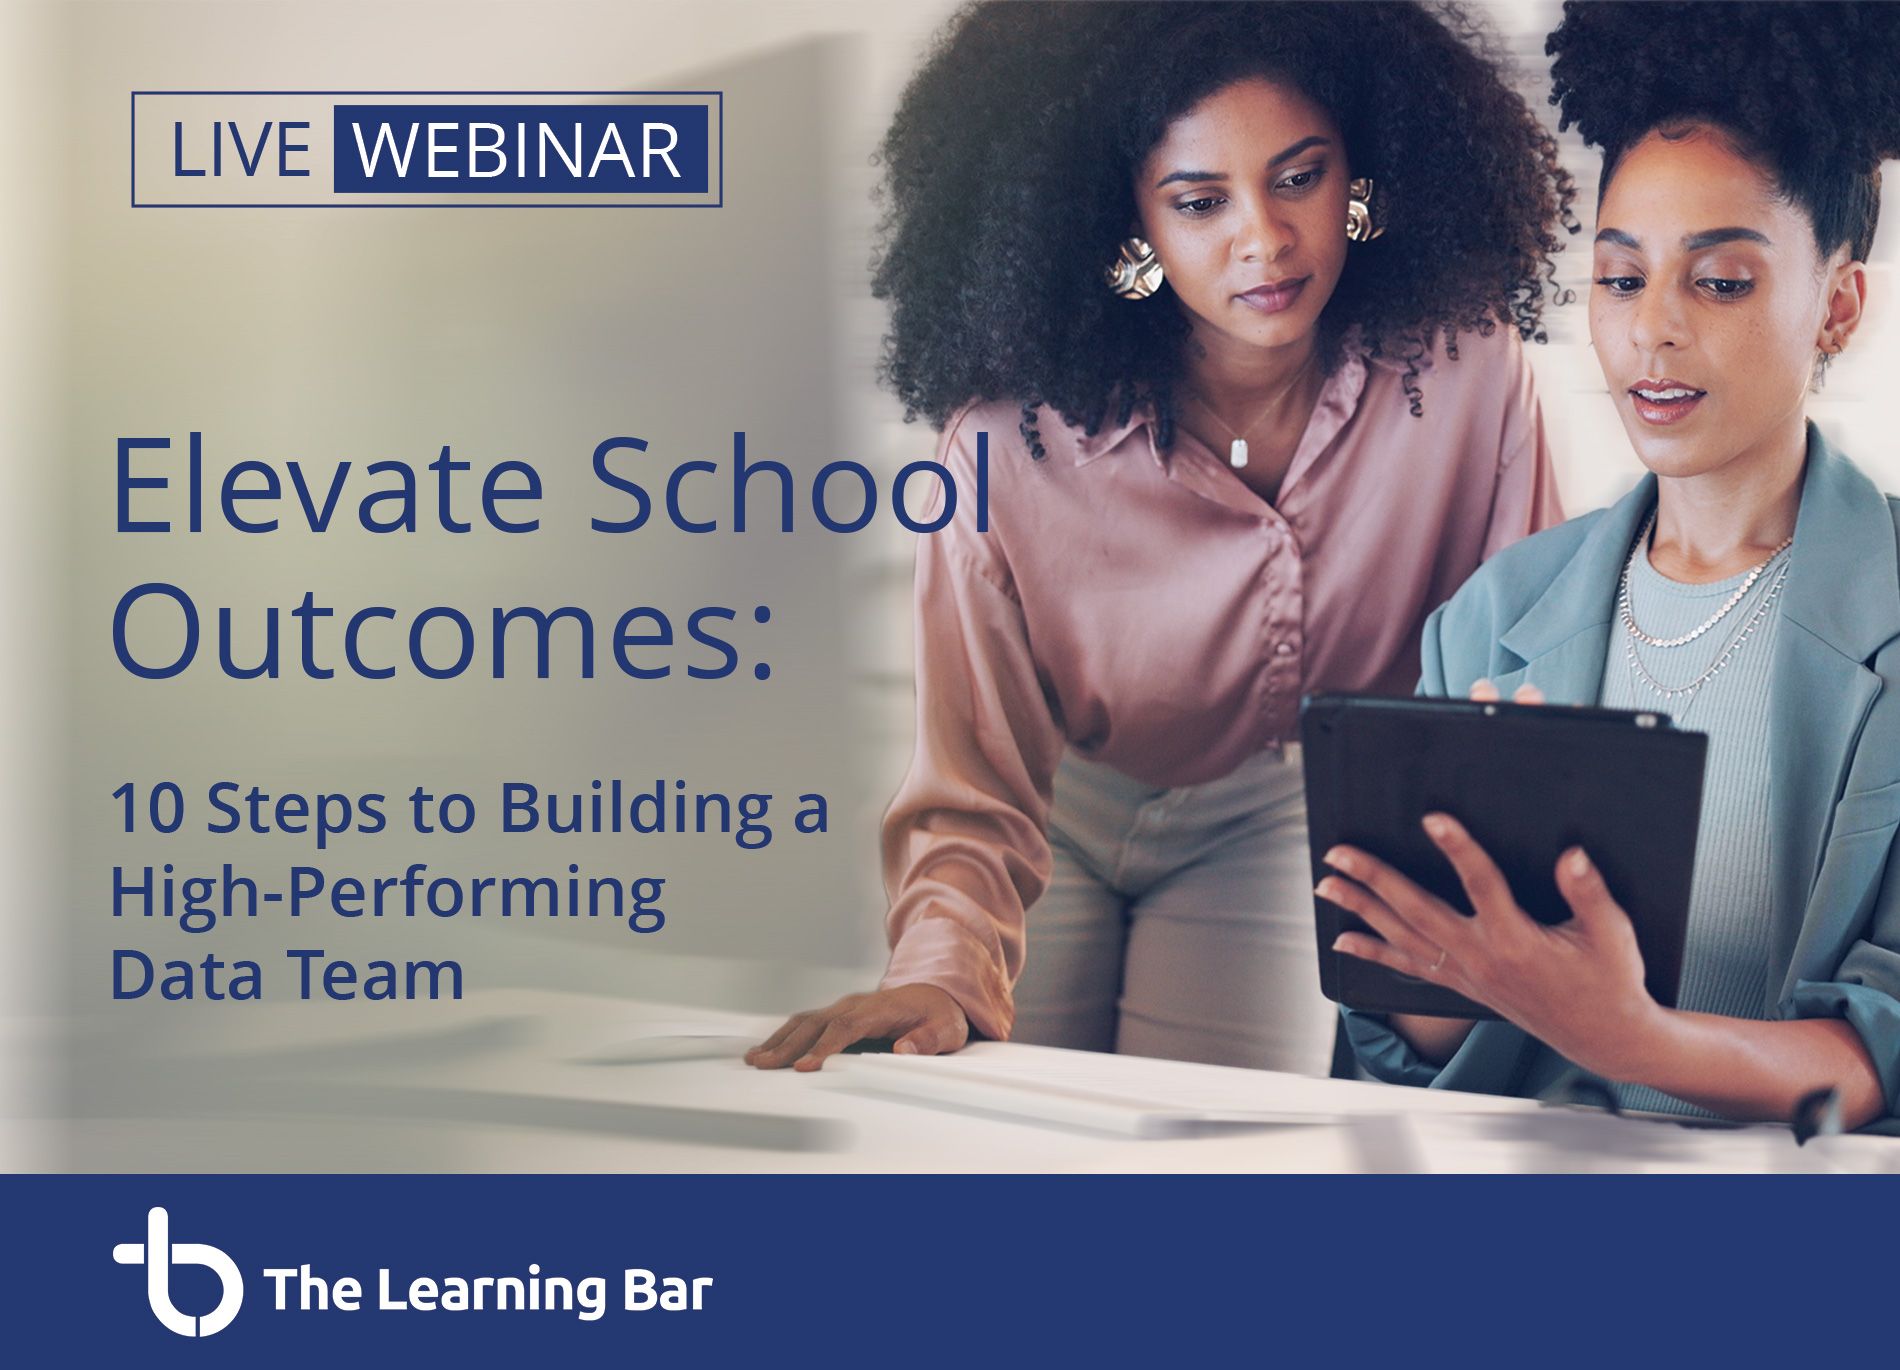 WEBINAR: Elevate School Outcomes: 10 Steps to Building a High-Performing Data Team